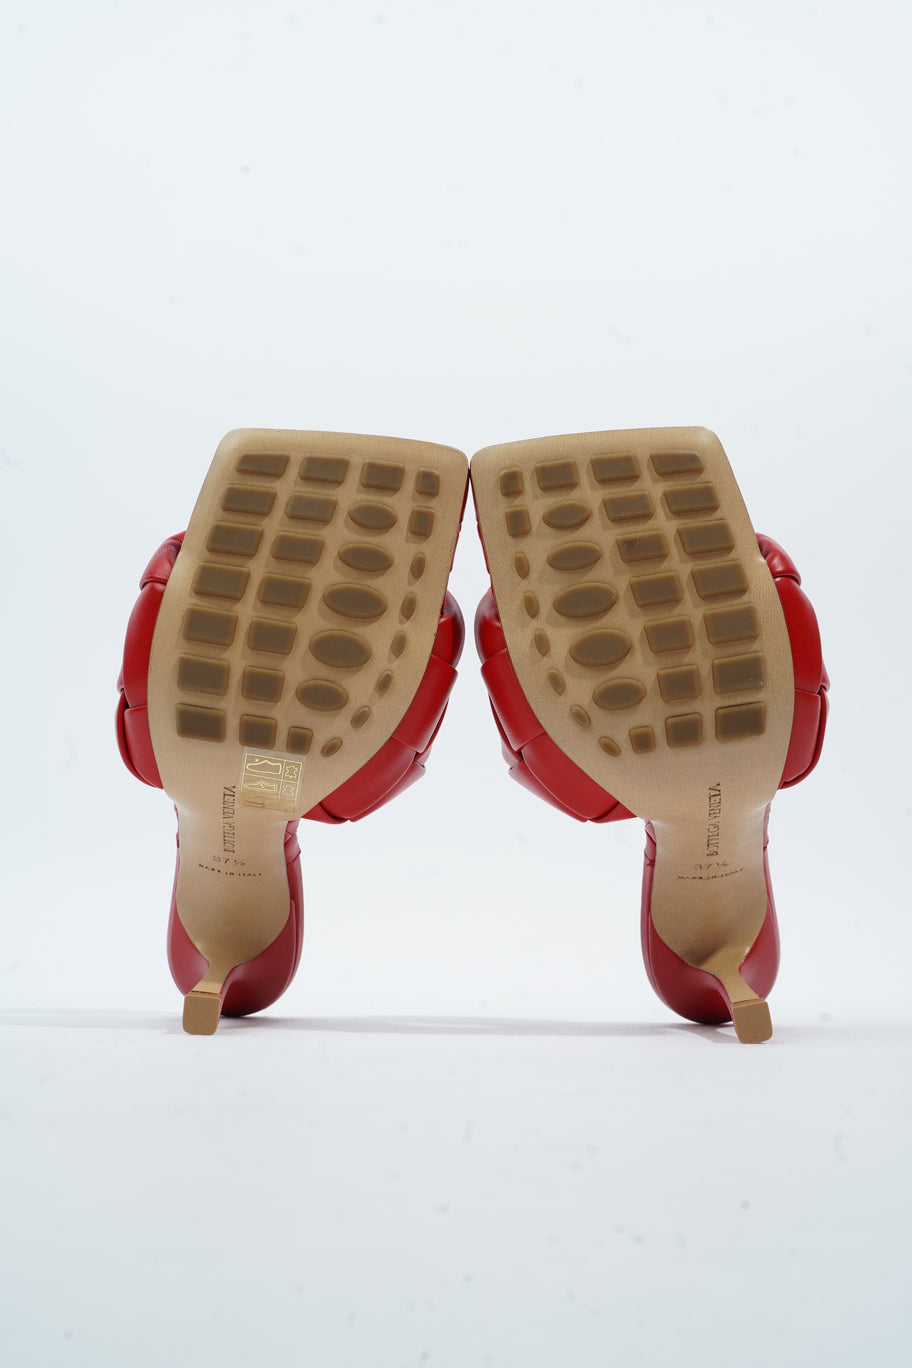 High Sandals 90 Red Leather EU 37.5 UK 4.5 Image 7